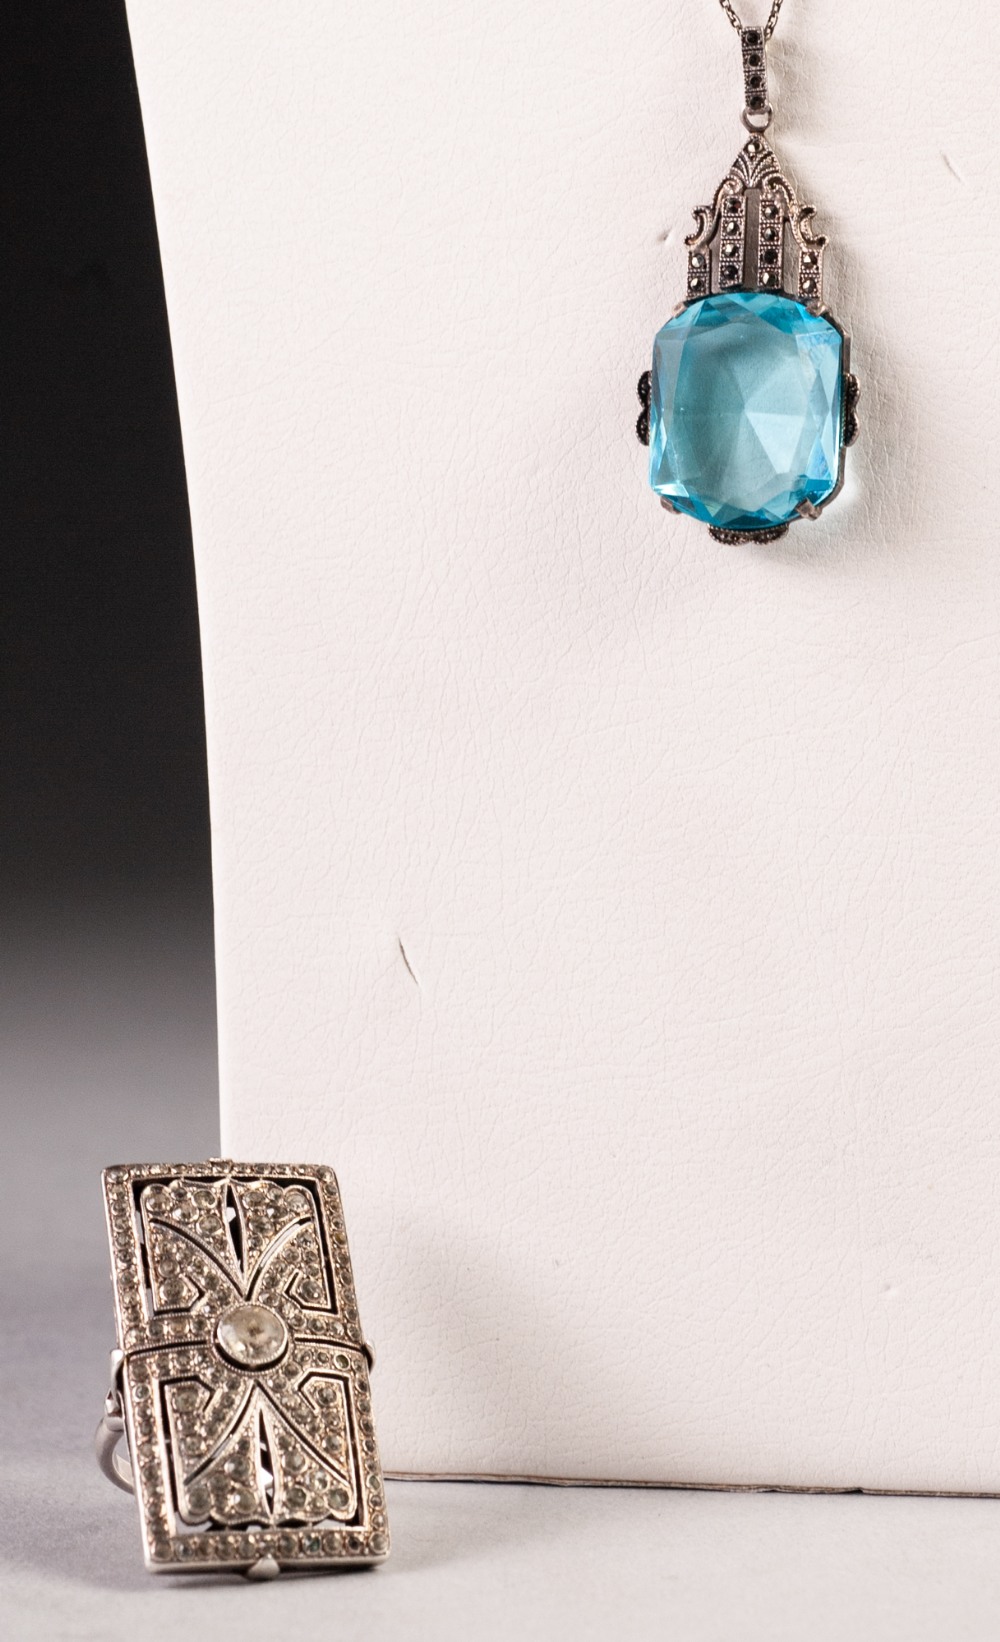 ART DECO MARCASITE PENDANT, set with a large rectangular blue stone on a fine chain necklace and - Image 2 of 2